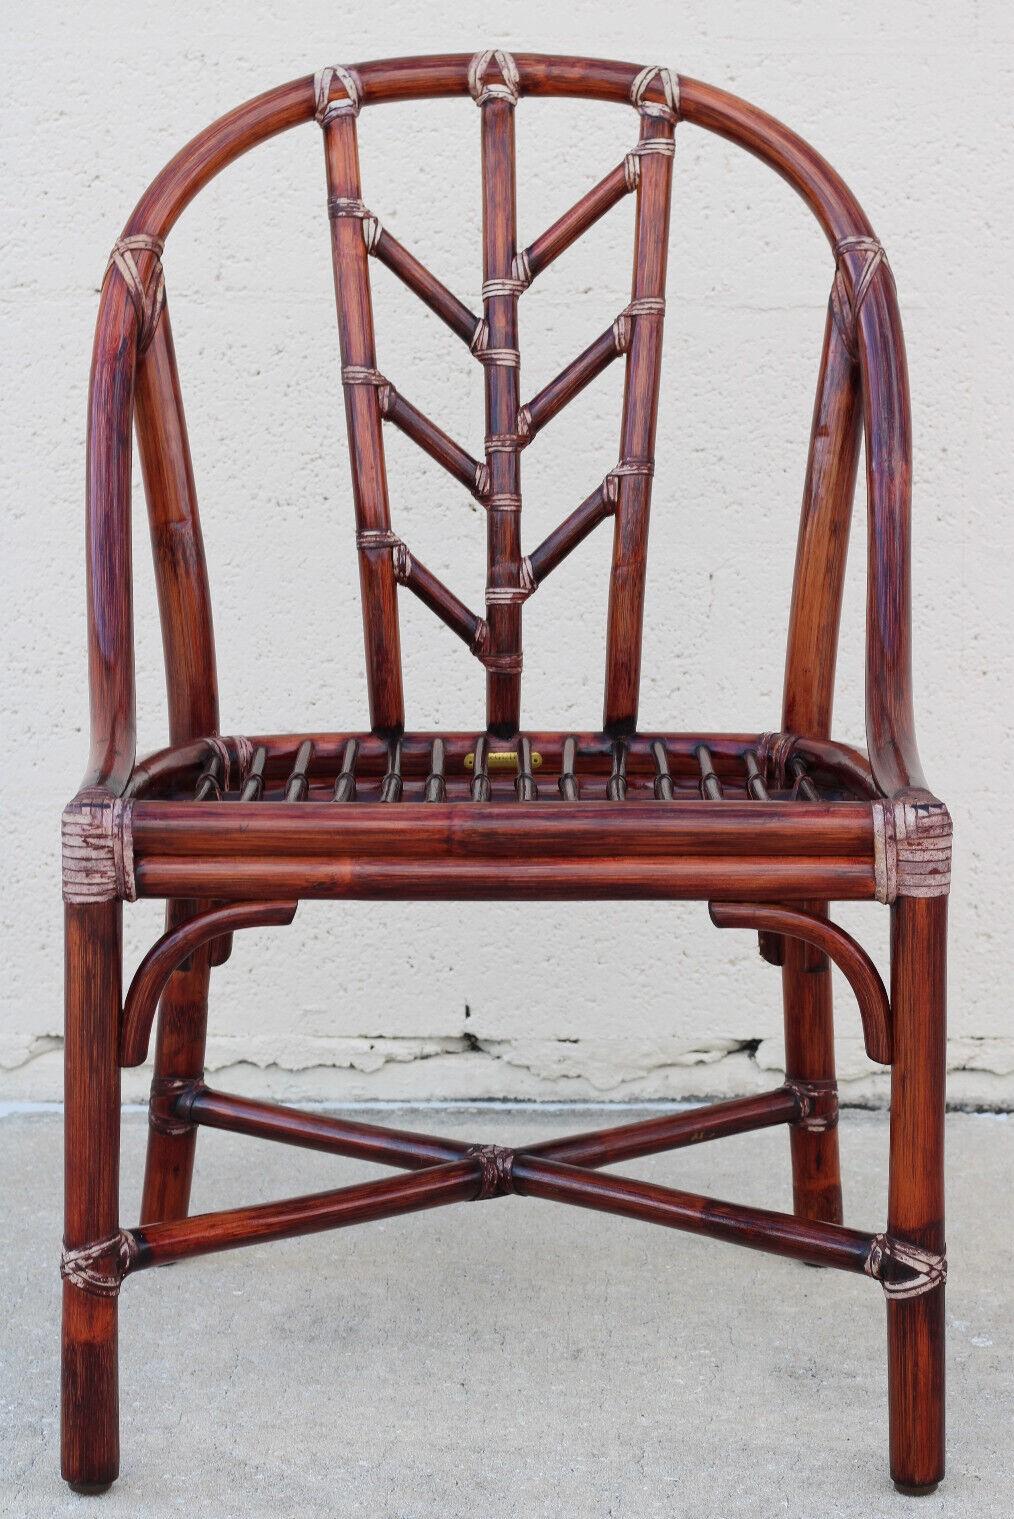 Hand-Crafted Elinor McGuire for McGuire San Francisco Rattan Dining Chairs, a Set of 4 For Sale